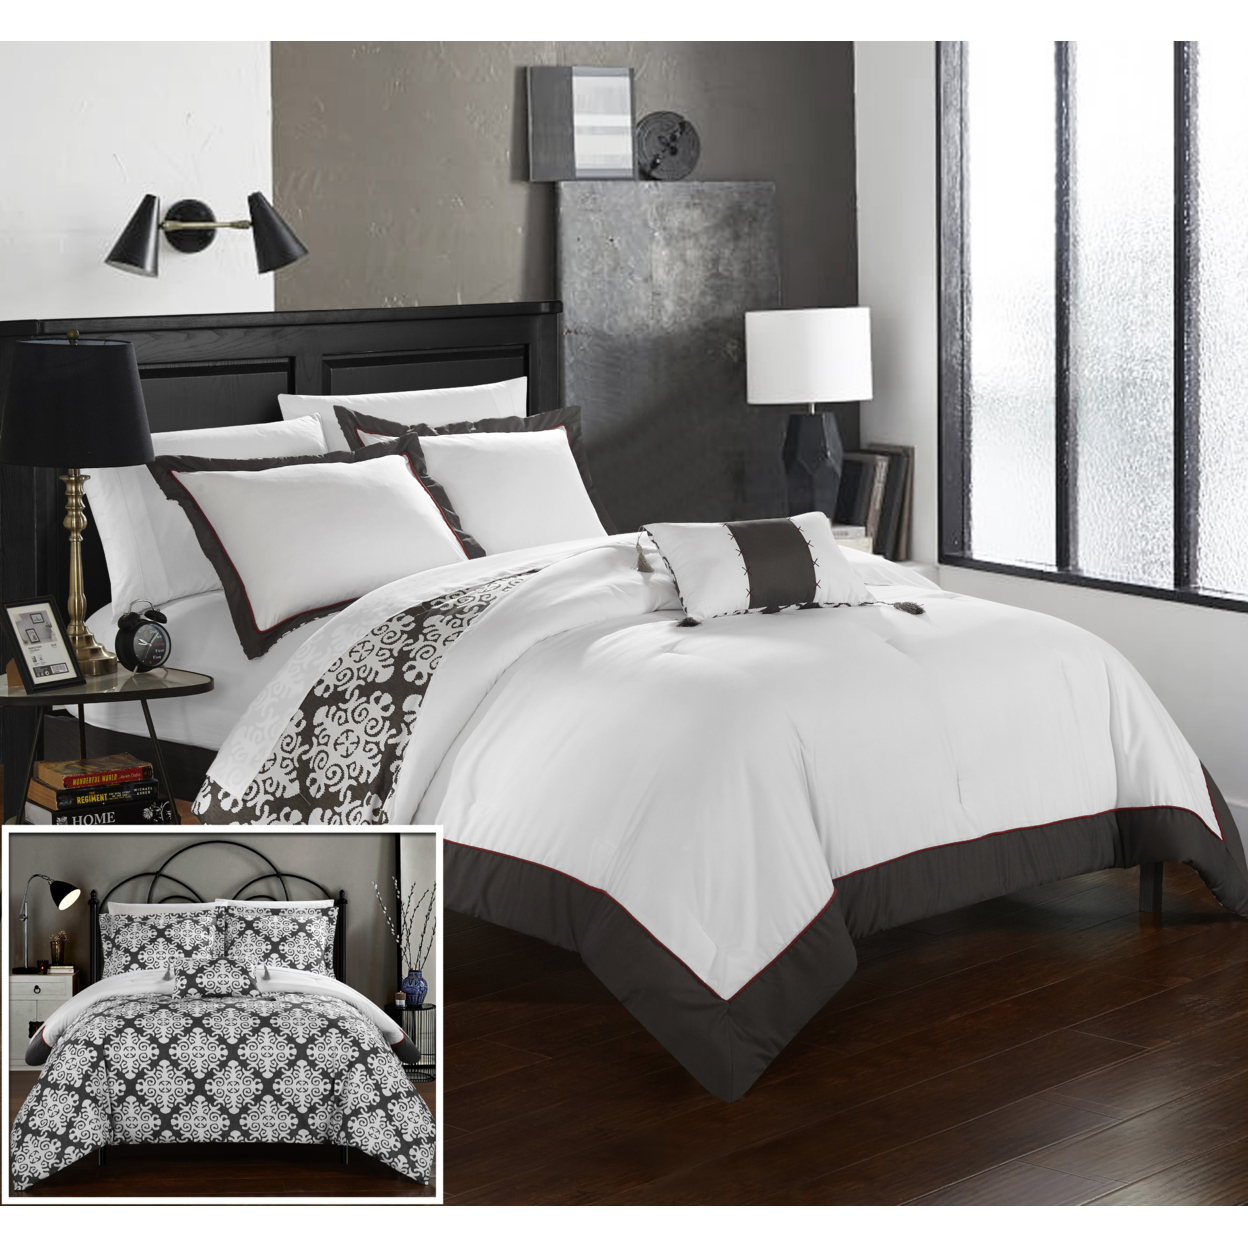 Chic Home 3/4 Piece Mallow Black And White REVERSIBLE Medallion Printed PLUSH Hotel Collection Duvet Cover Set - Grey, King